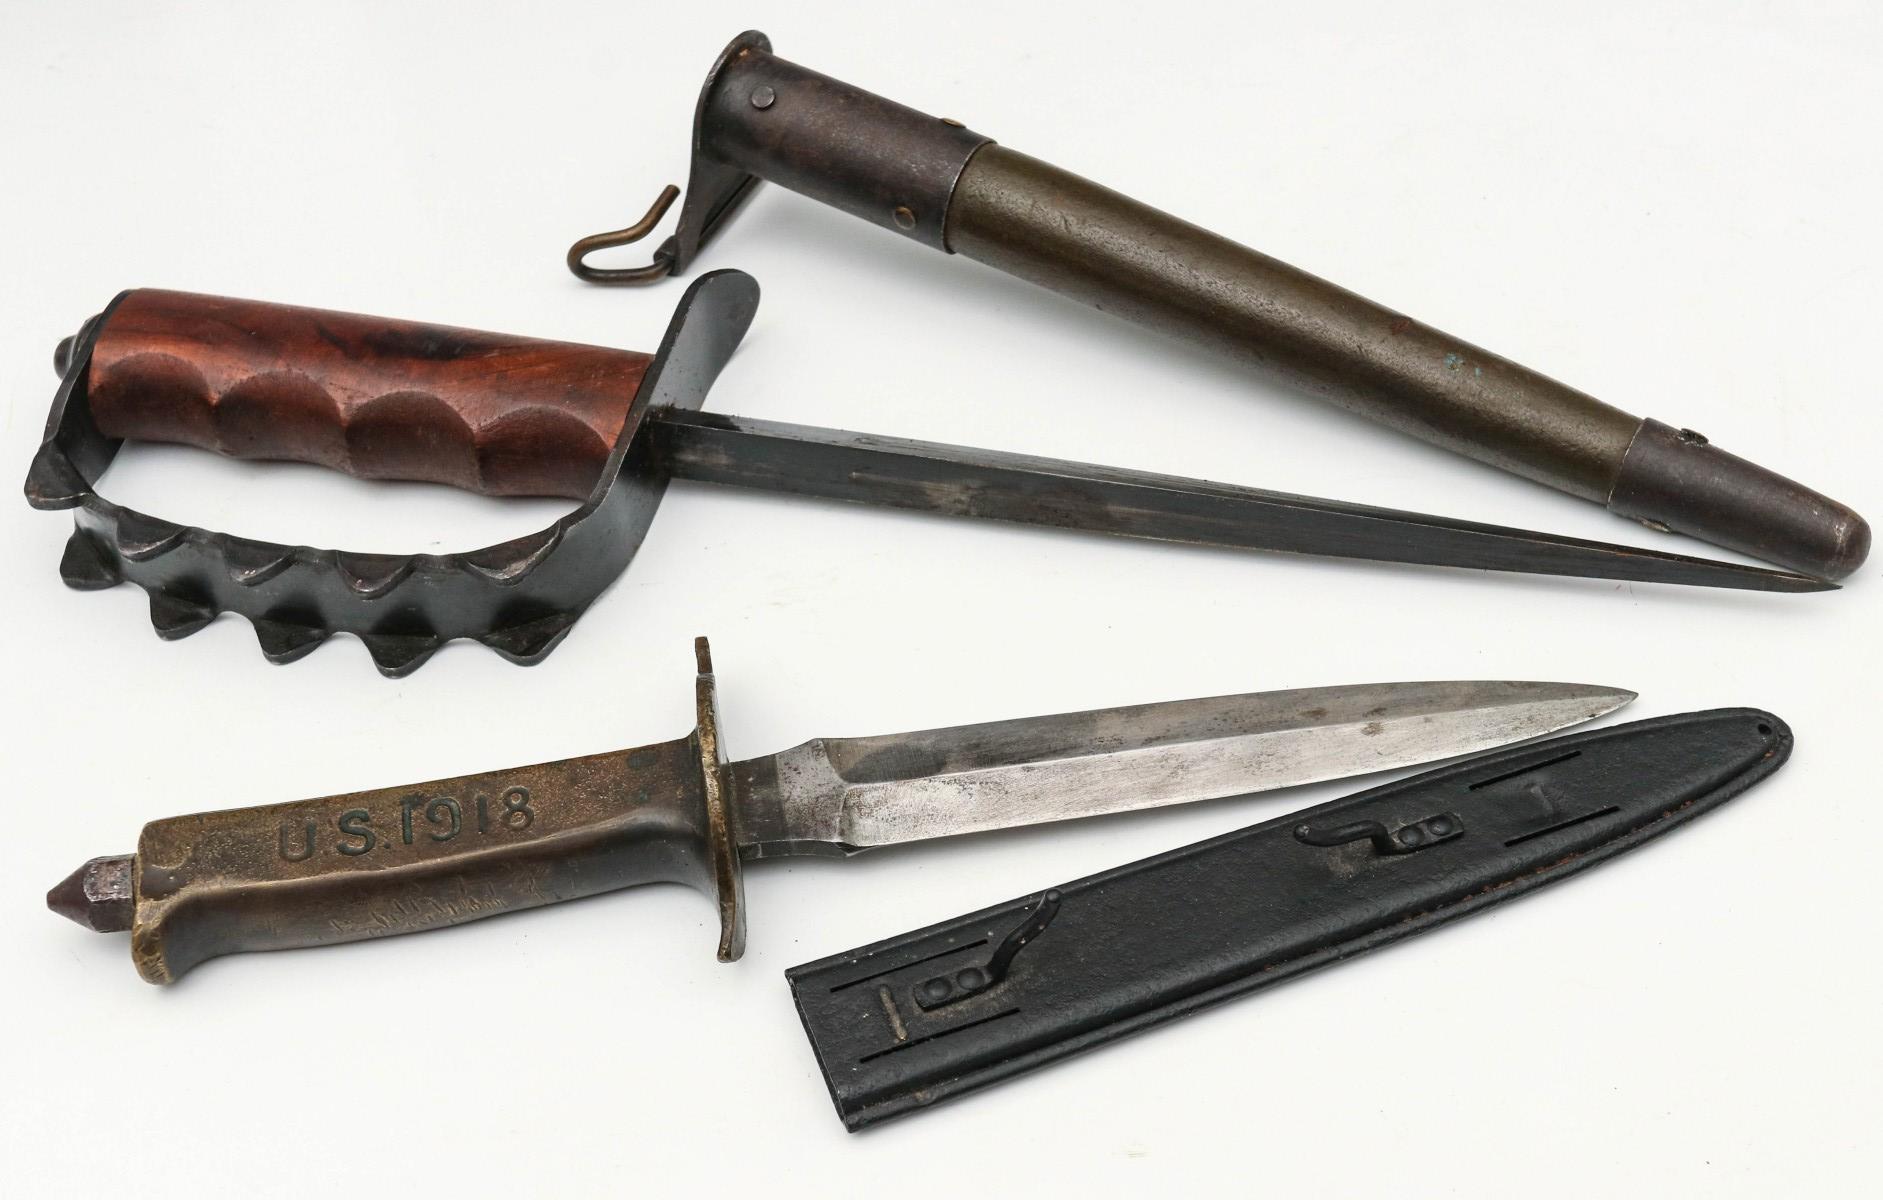 M-1917 AND M-1918 TRENCH KNIVES, ONE WITH SCABBARD